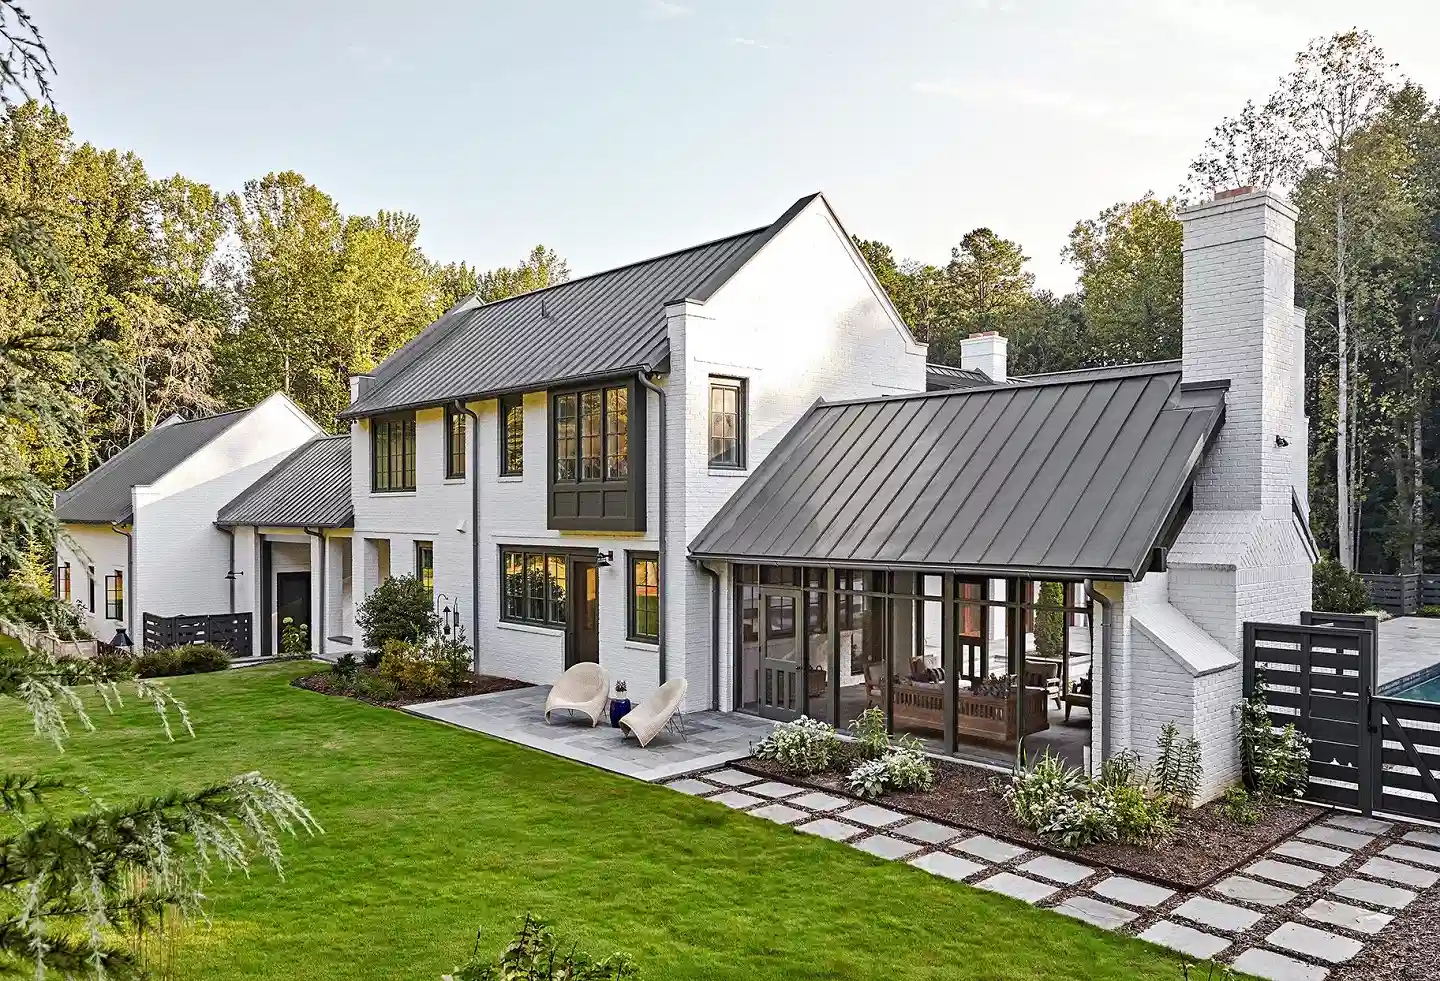 The Role of Technology in Modern Farmhouse Exterior Design